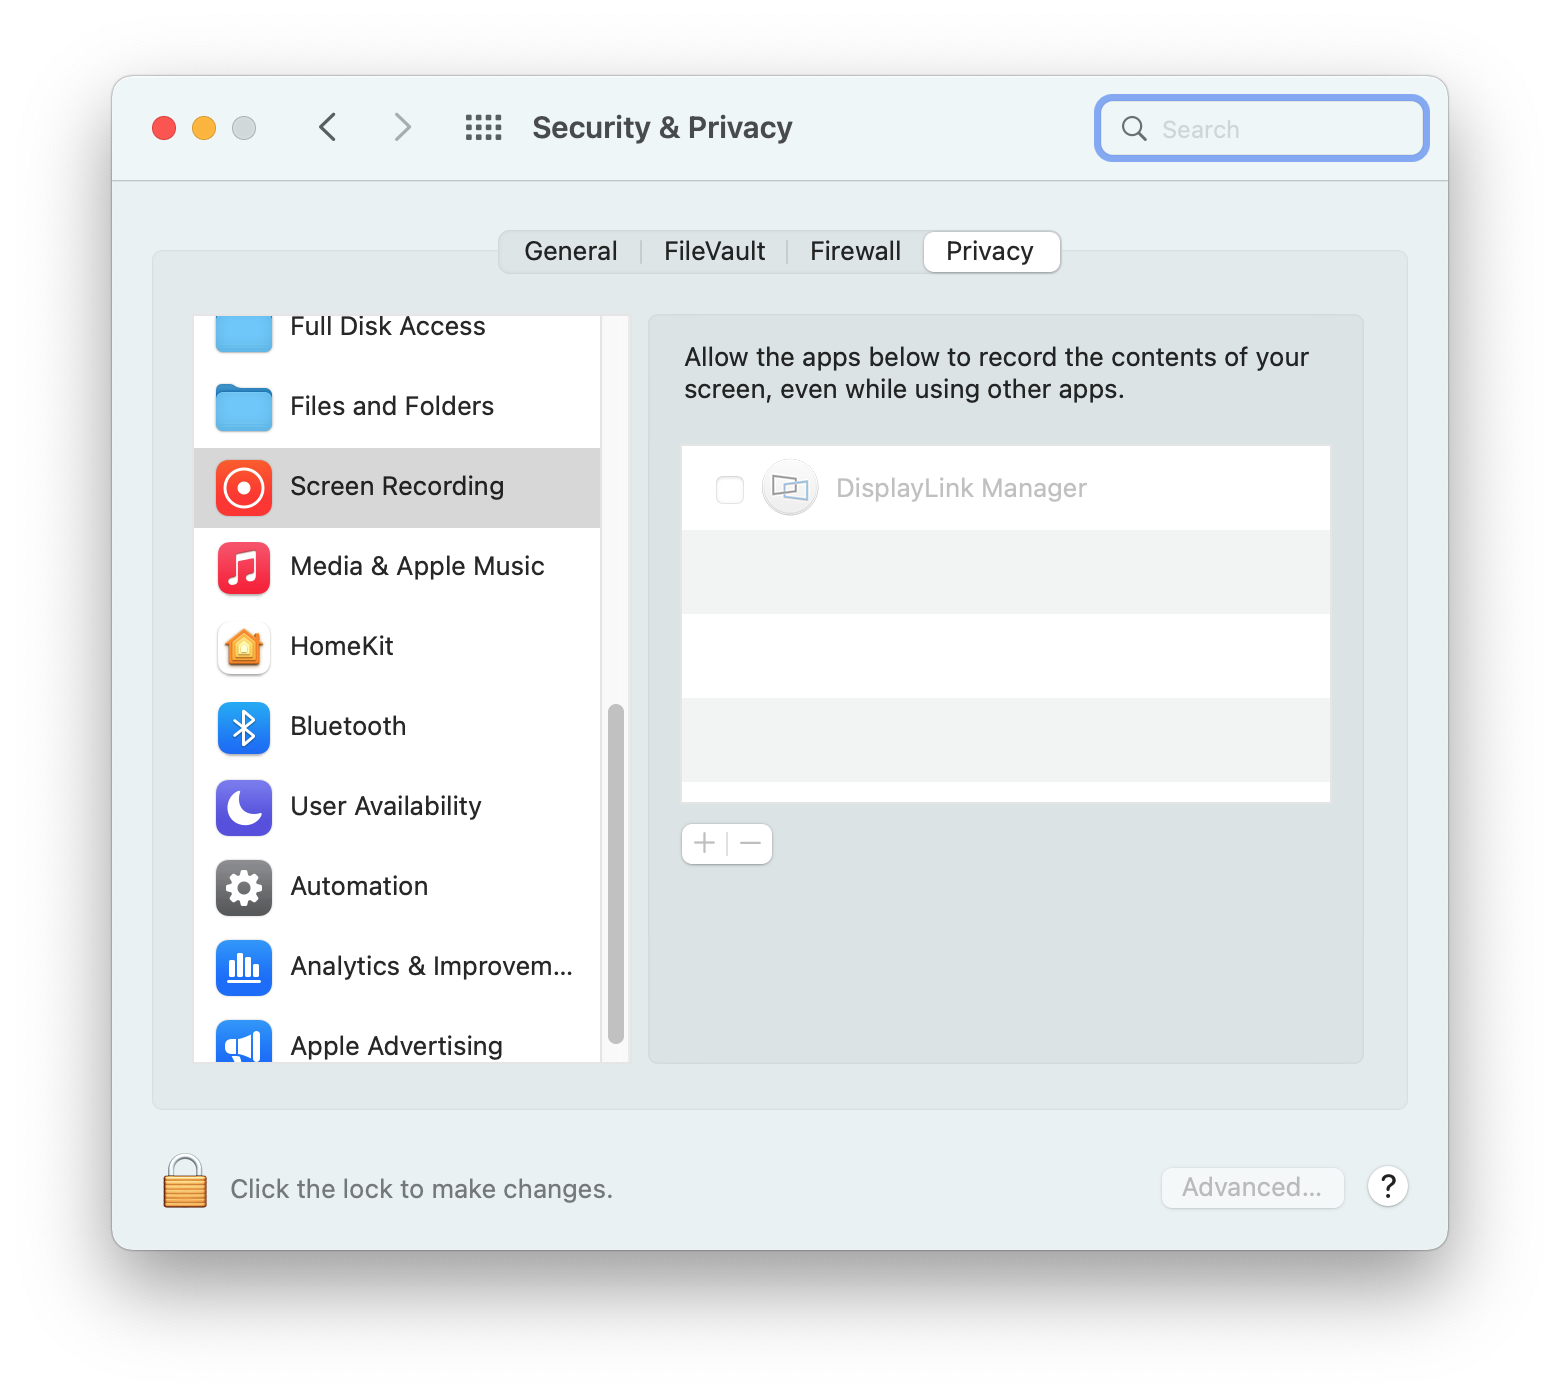 Security and Privacy Settings for Screen Recording